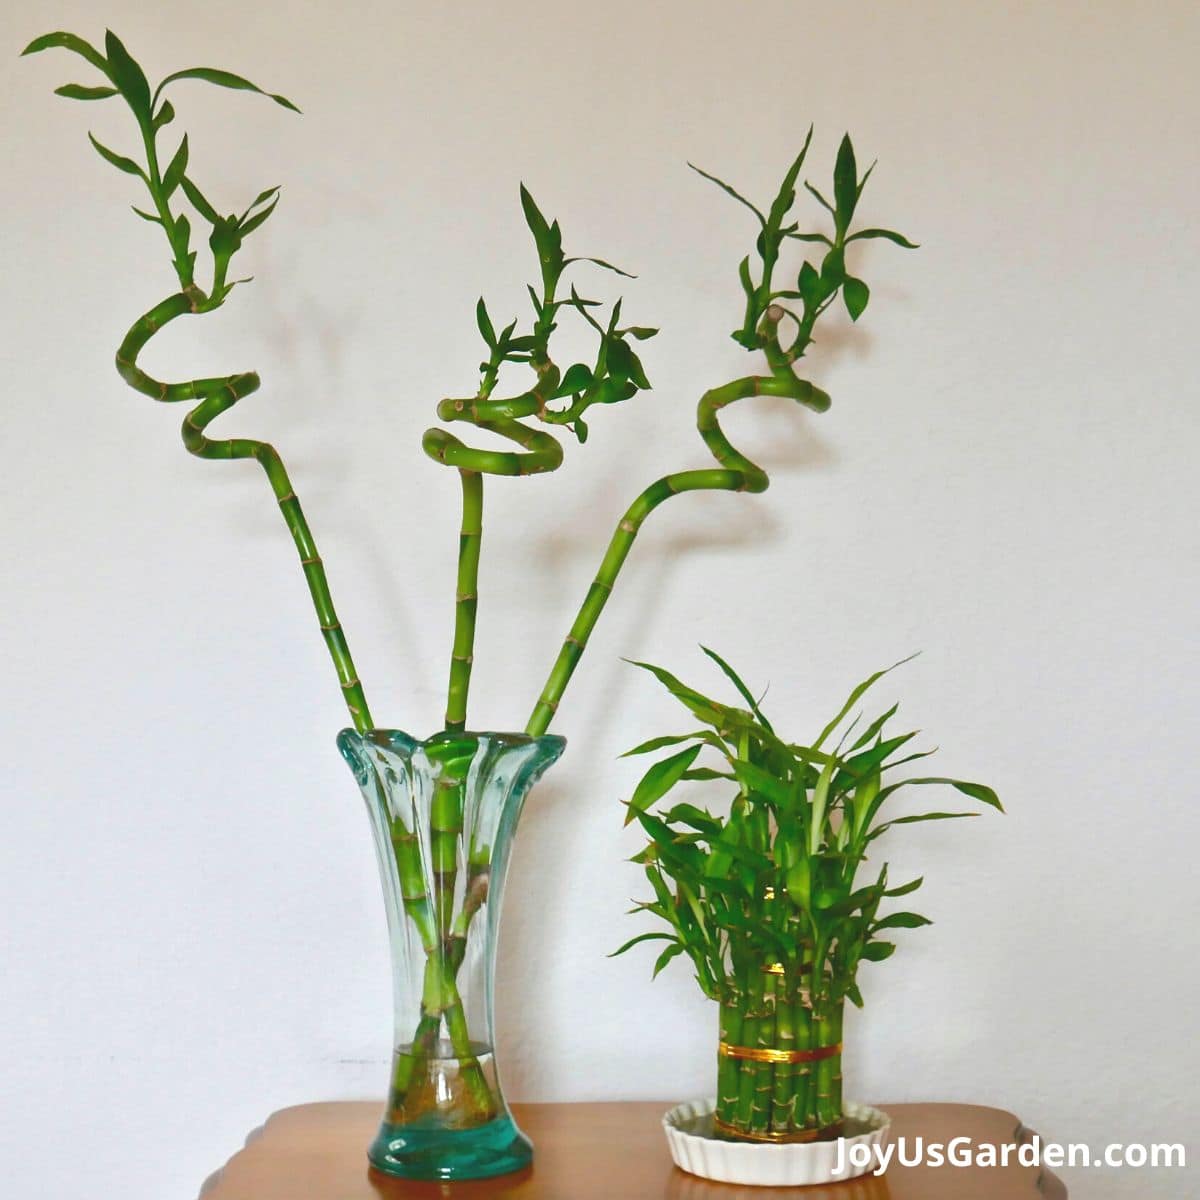 two lucky bamboo on table growing indoors in water 